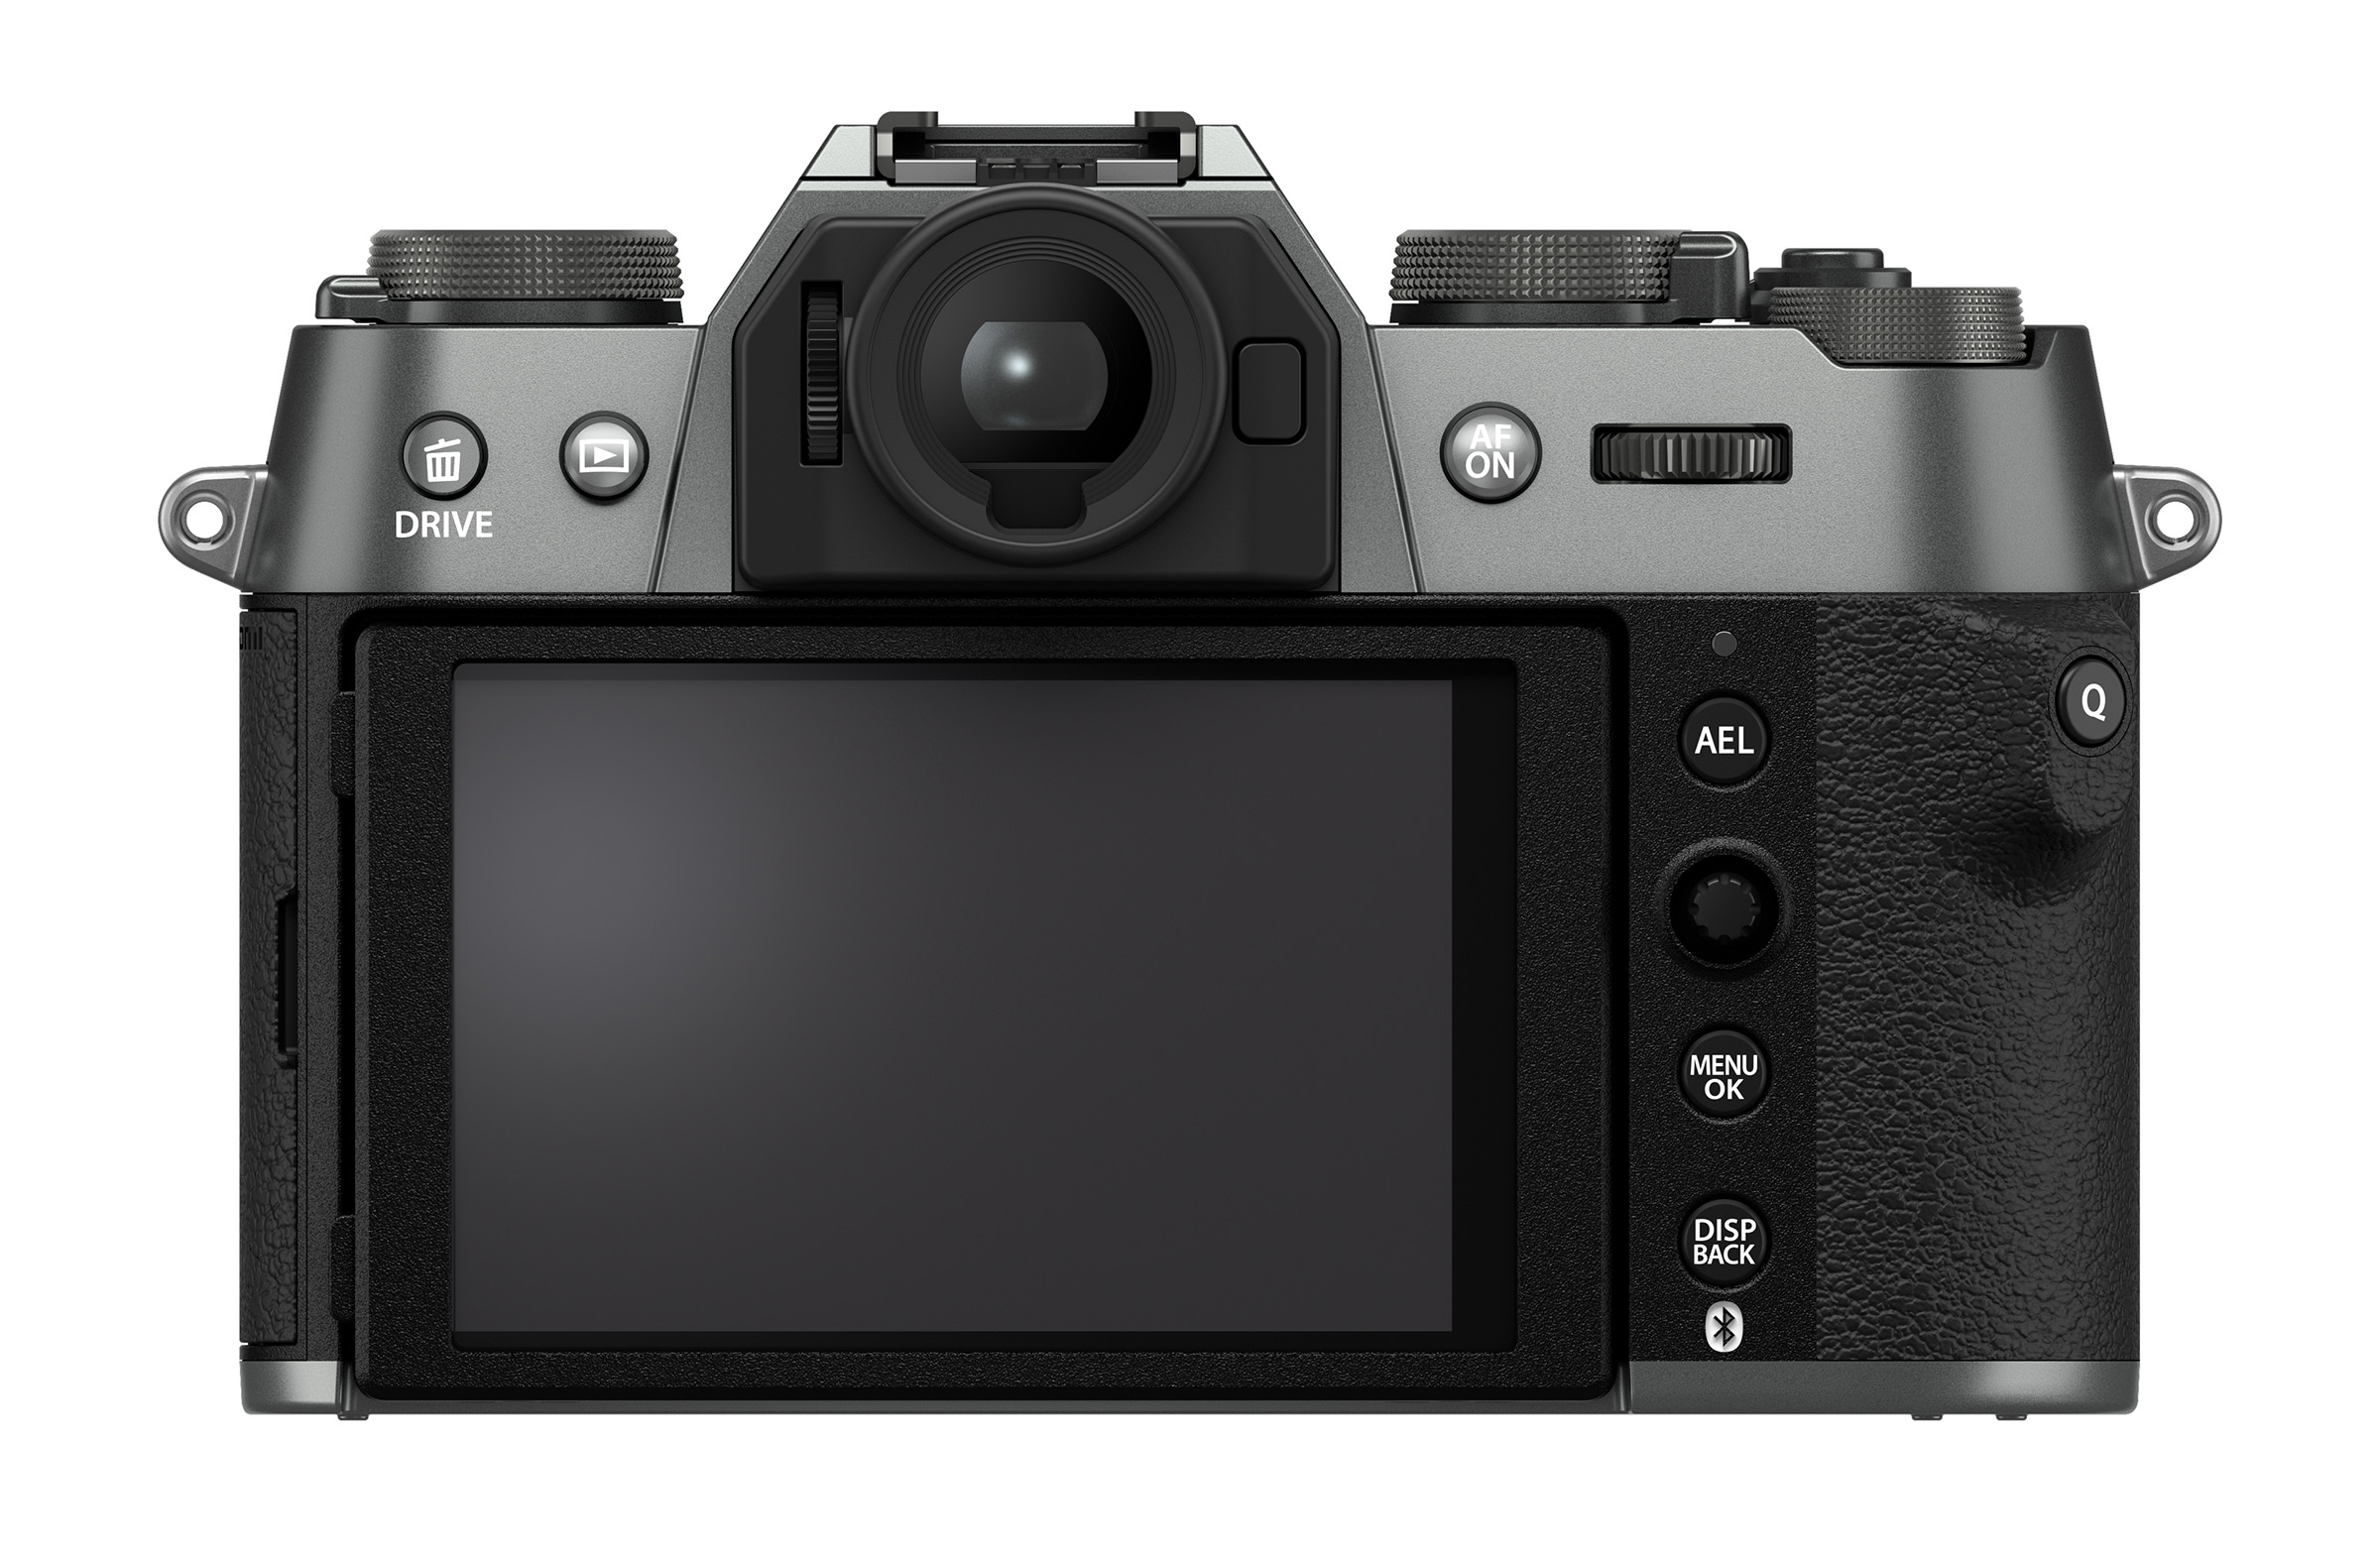 Fujifilm’s X-T50 has a special dial for film simulations